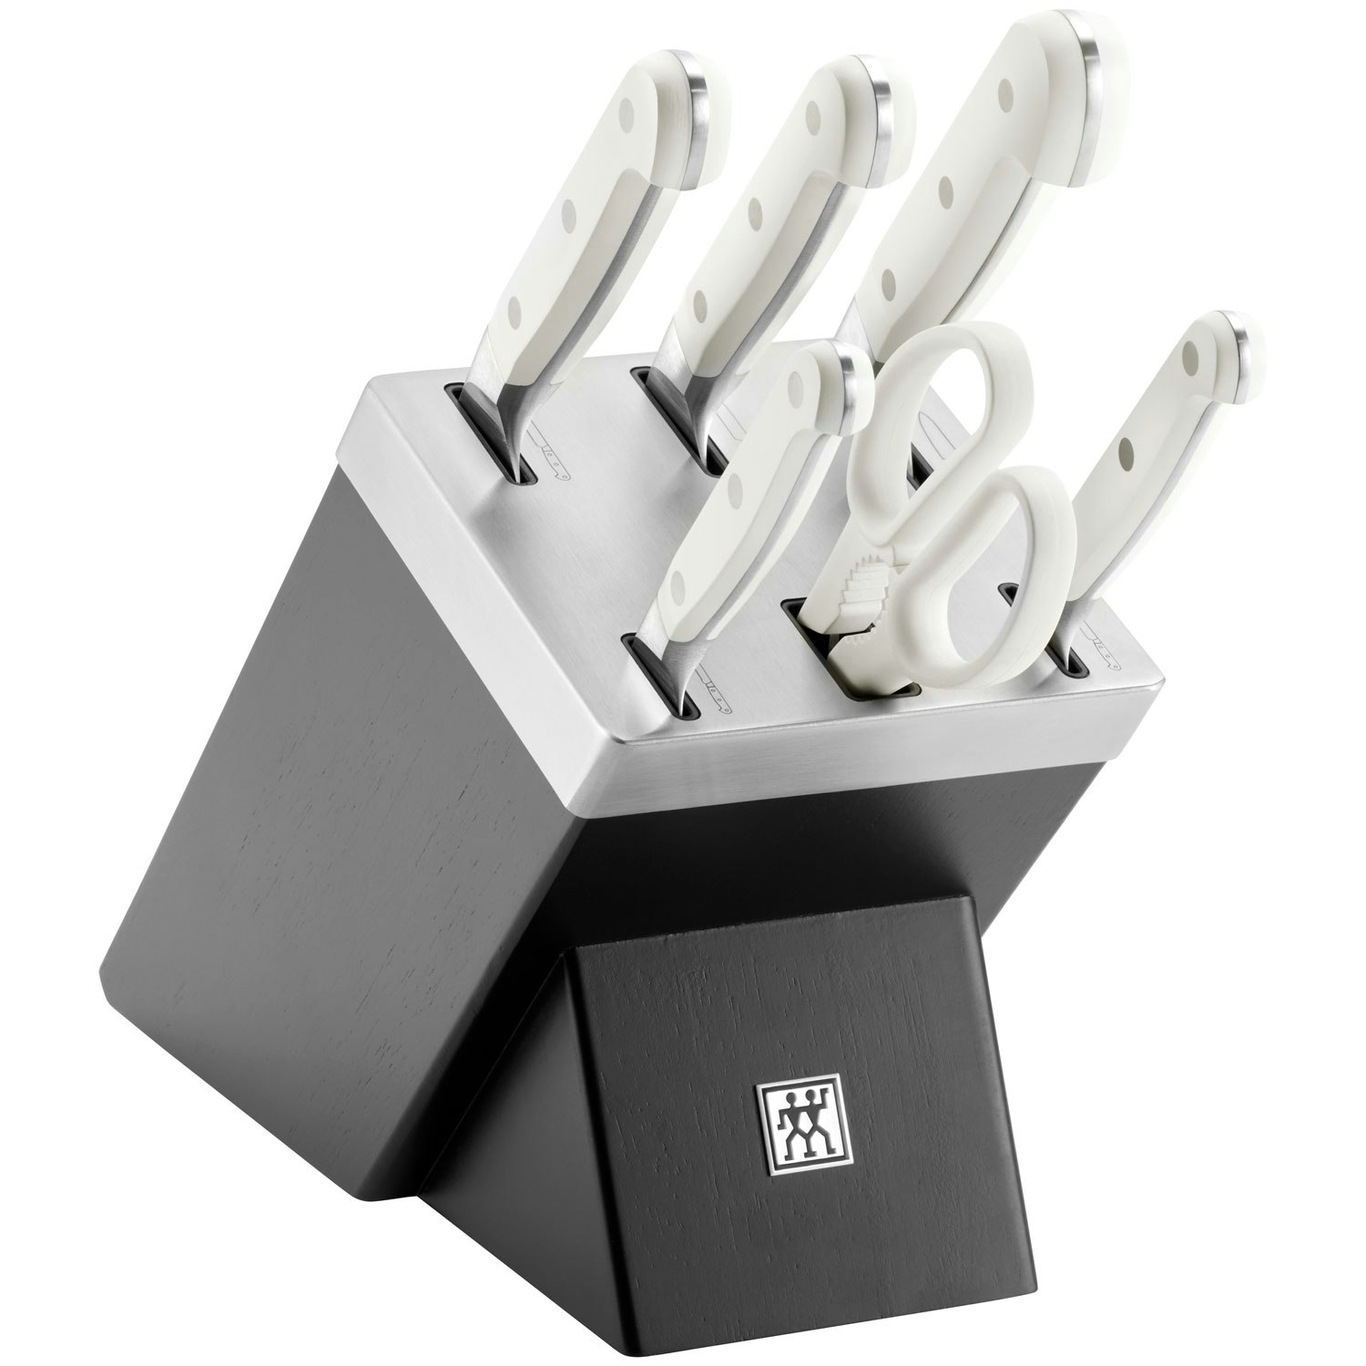 Pro Le Blanc Knife Block With Knives, 7 Pieces